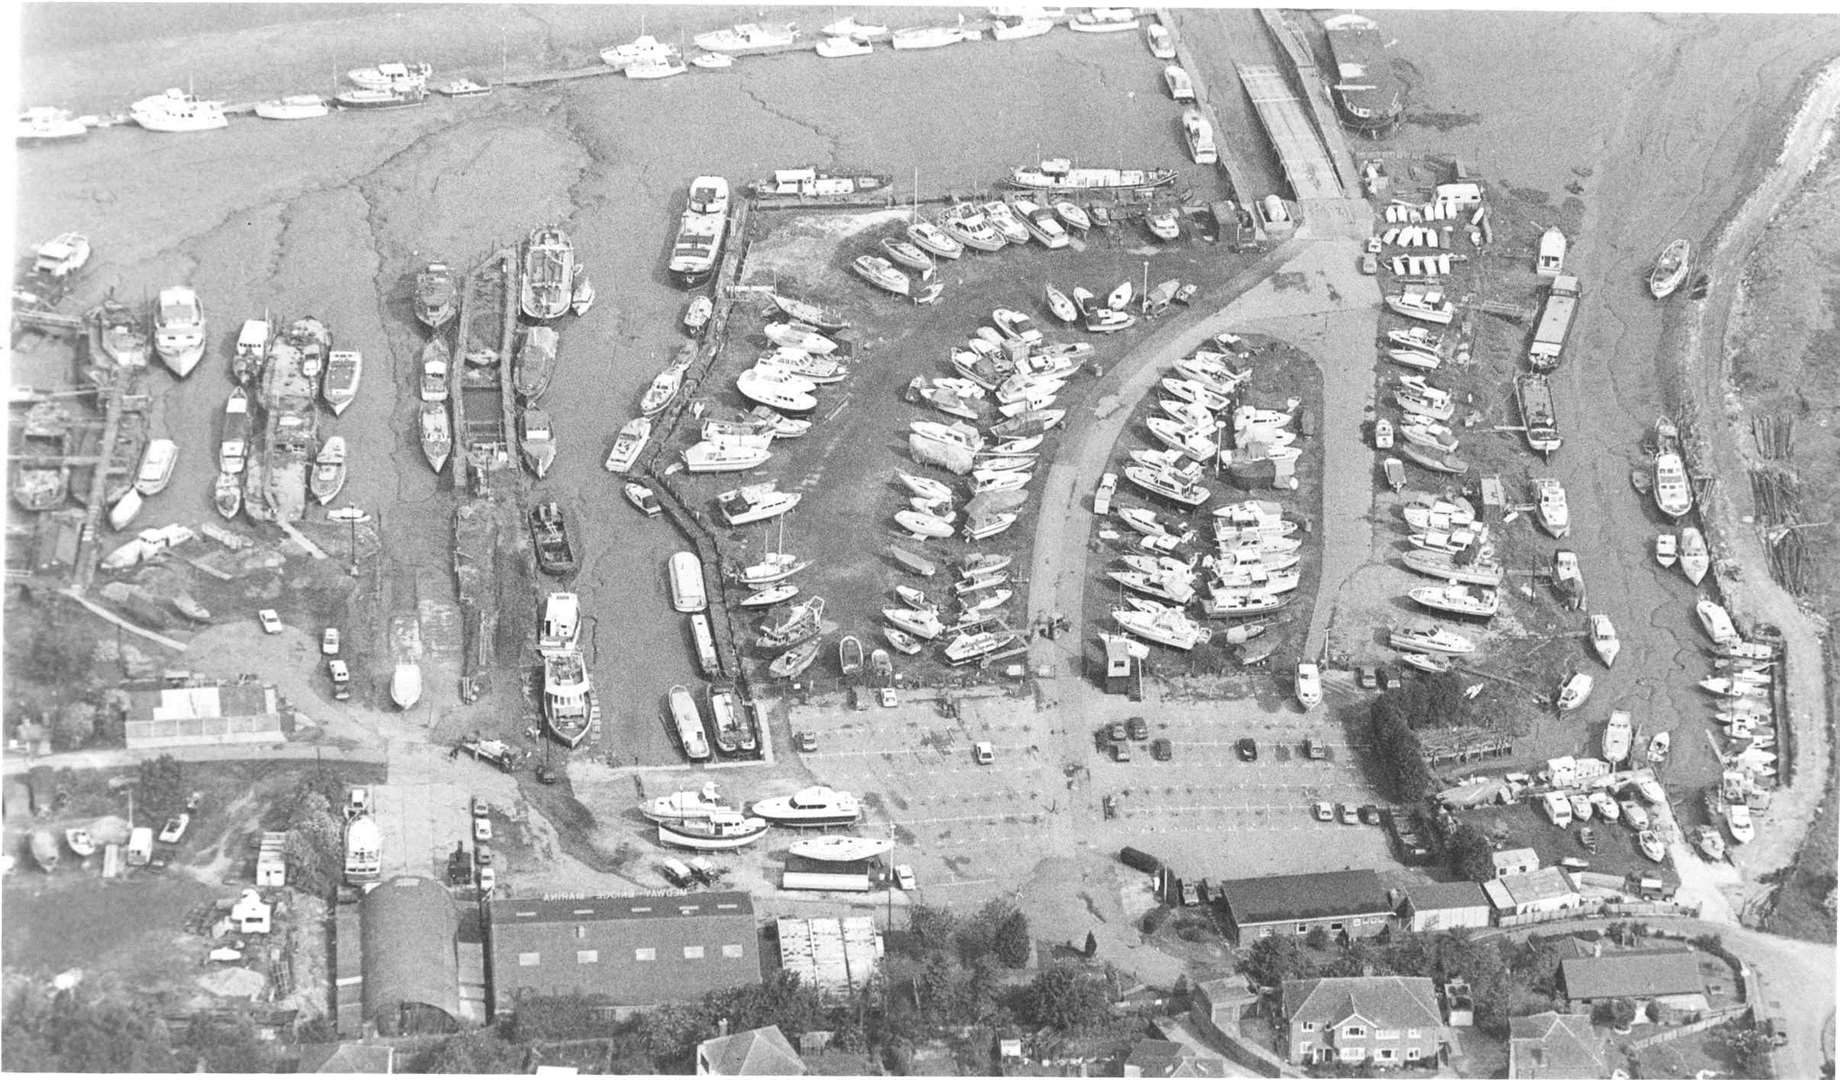 Borstal Marina, Rochester, pictured in May 1990